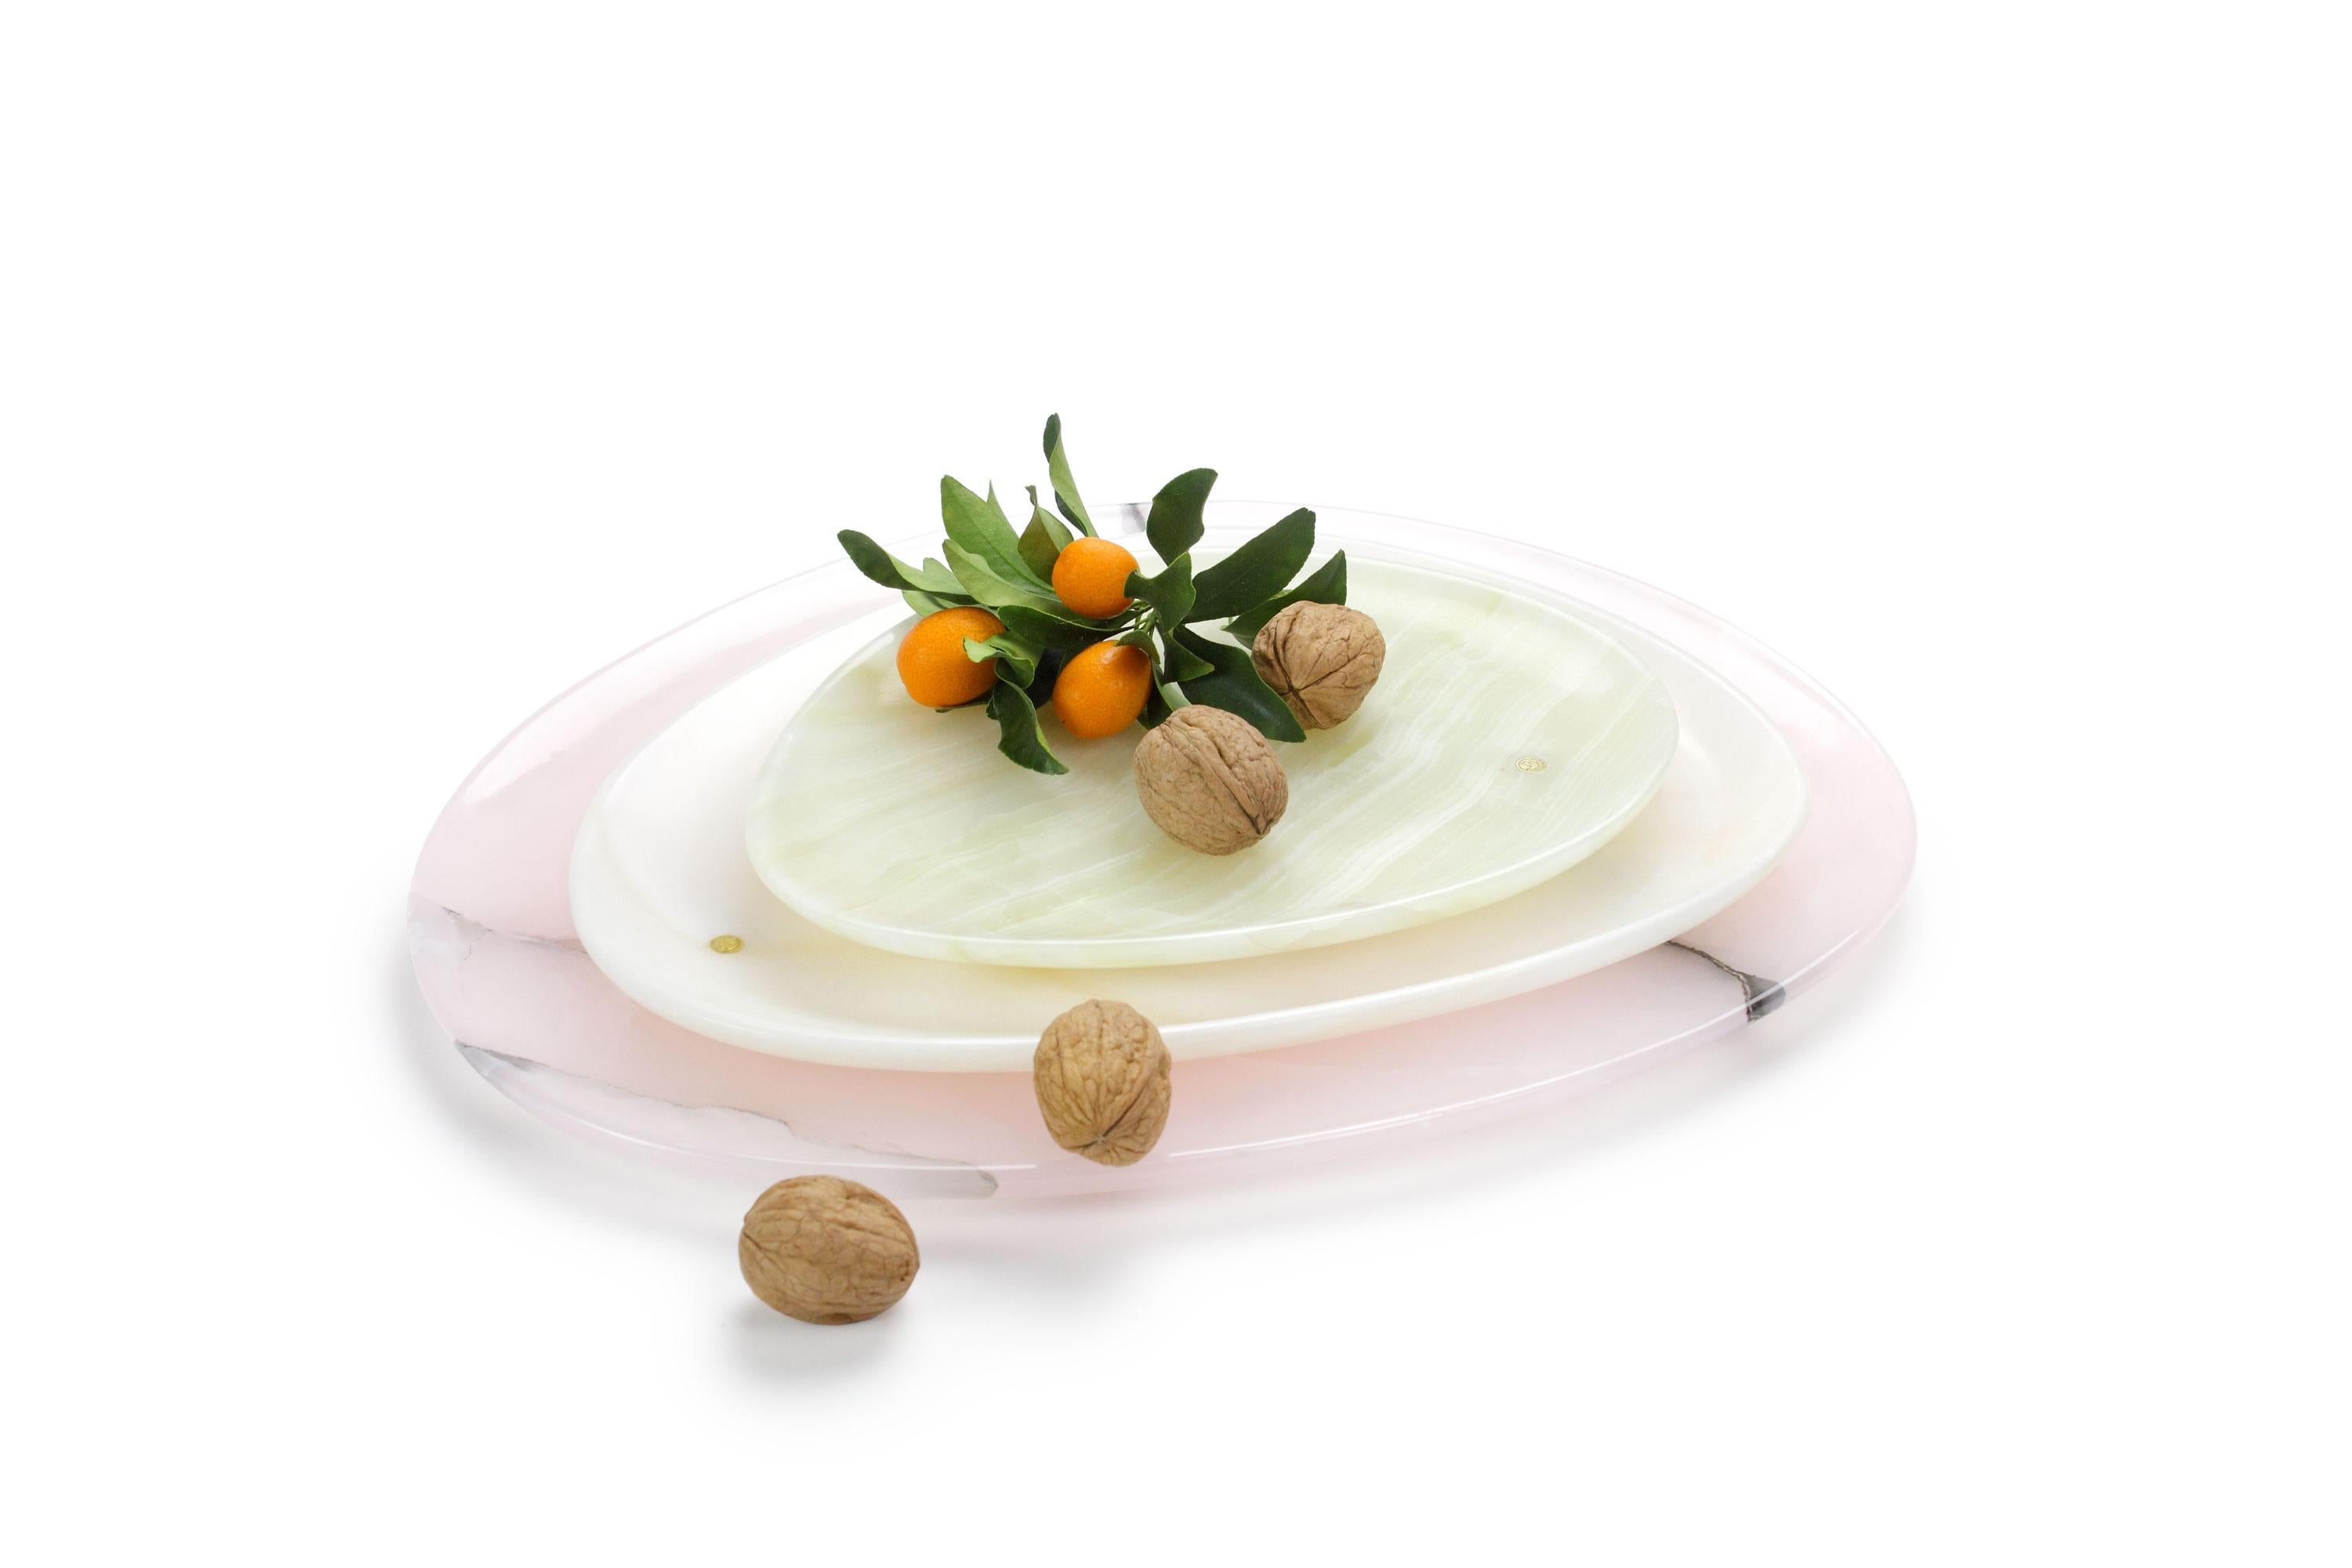 Hand carved presentation plates in green, white and pink onyx. 
Multiple use as plates, platters and placers. 

Dimensions: Small - L24 W20 H1.8 cm, Medium - L30 W28 H1.8 cm, Big - L36 W35 H1.8 cm.
Available in different marbles, onyx and quartzite.